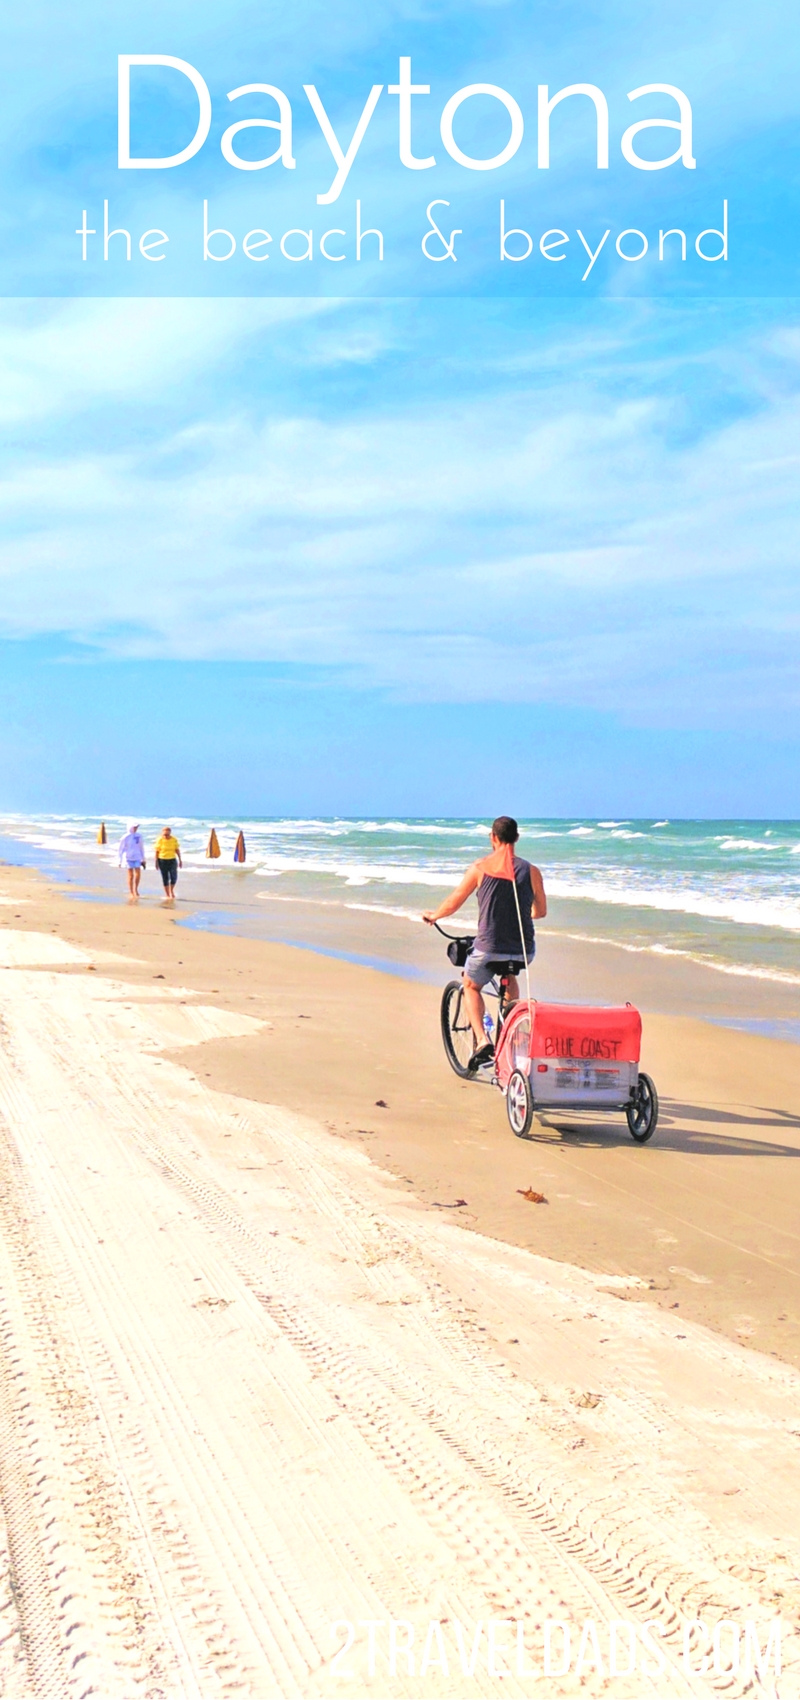 There's more to Daytona Beach than the beach itself. Family travel to Dayton includes Florida nature, the perfect lighthouse, freshwater springs and pockets of fun culture. 2traveldads.com